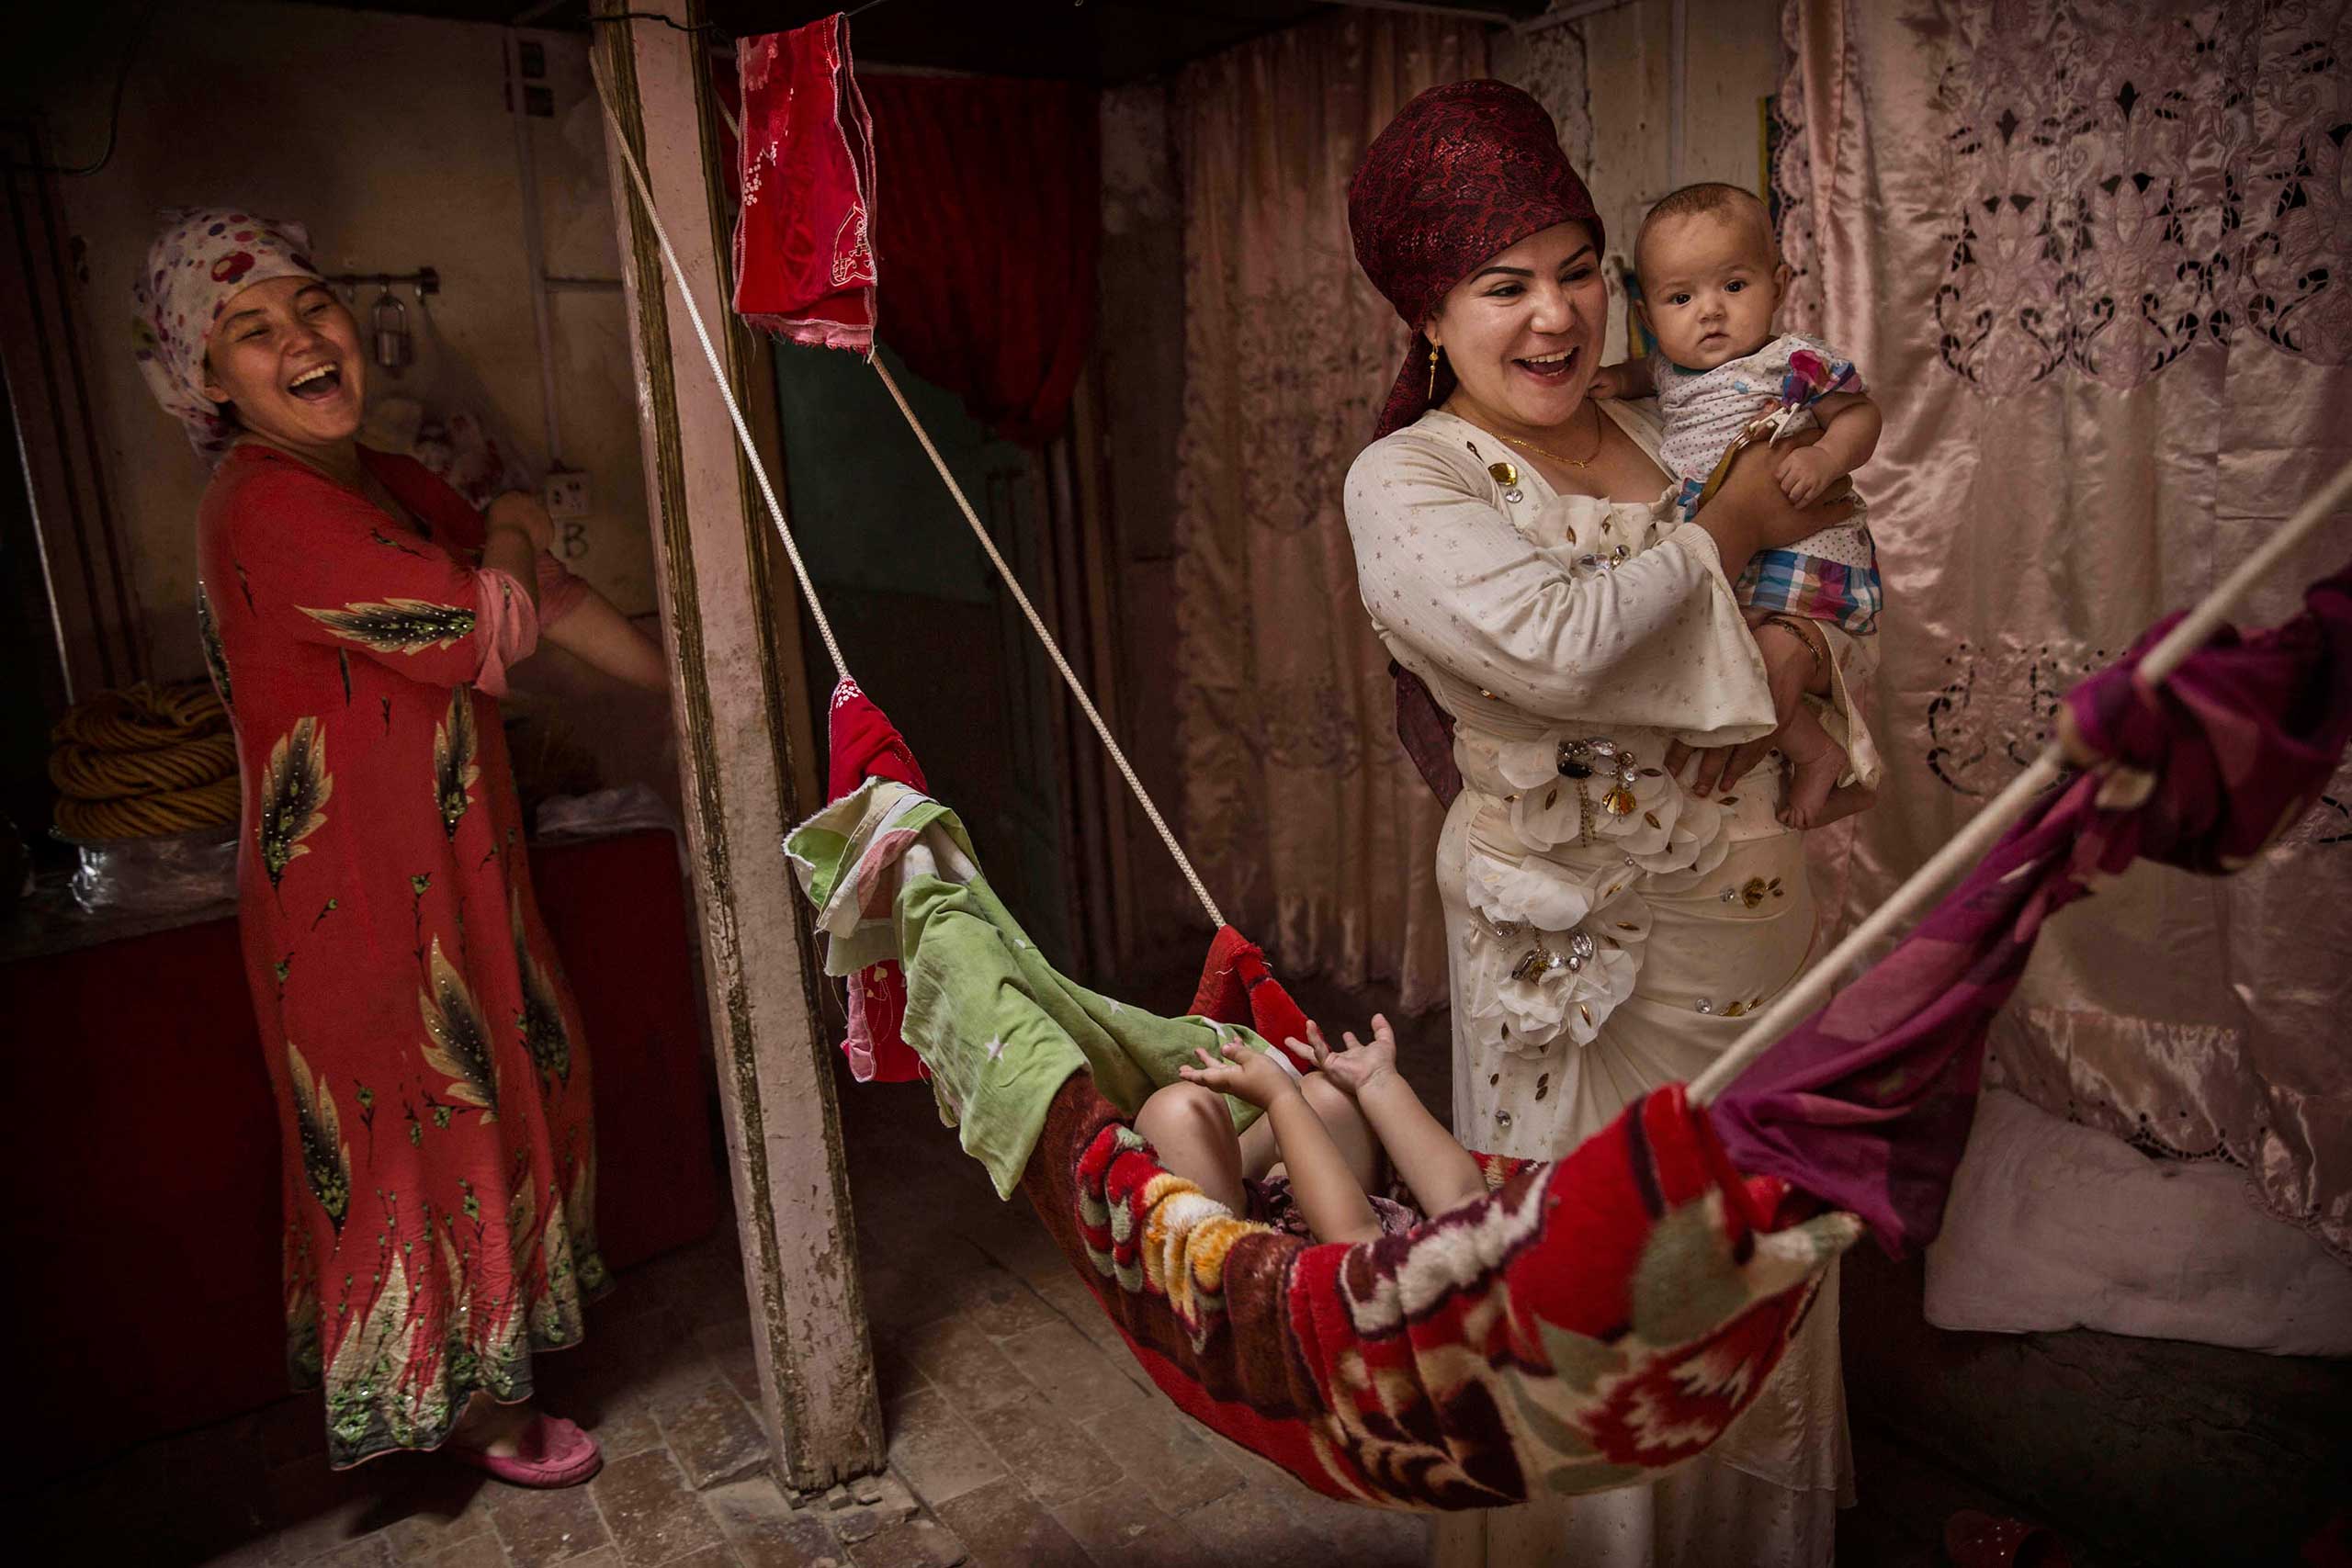 Uighur women laugh as they take care of their children at home before the Eid holiday in old Kashgar, Xinjiang Province, China,  July 28, 2014.